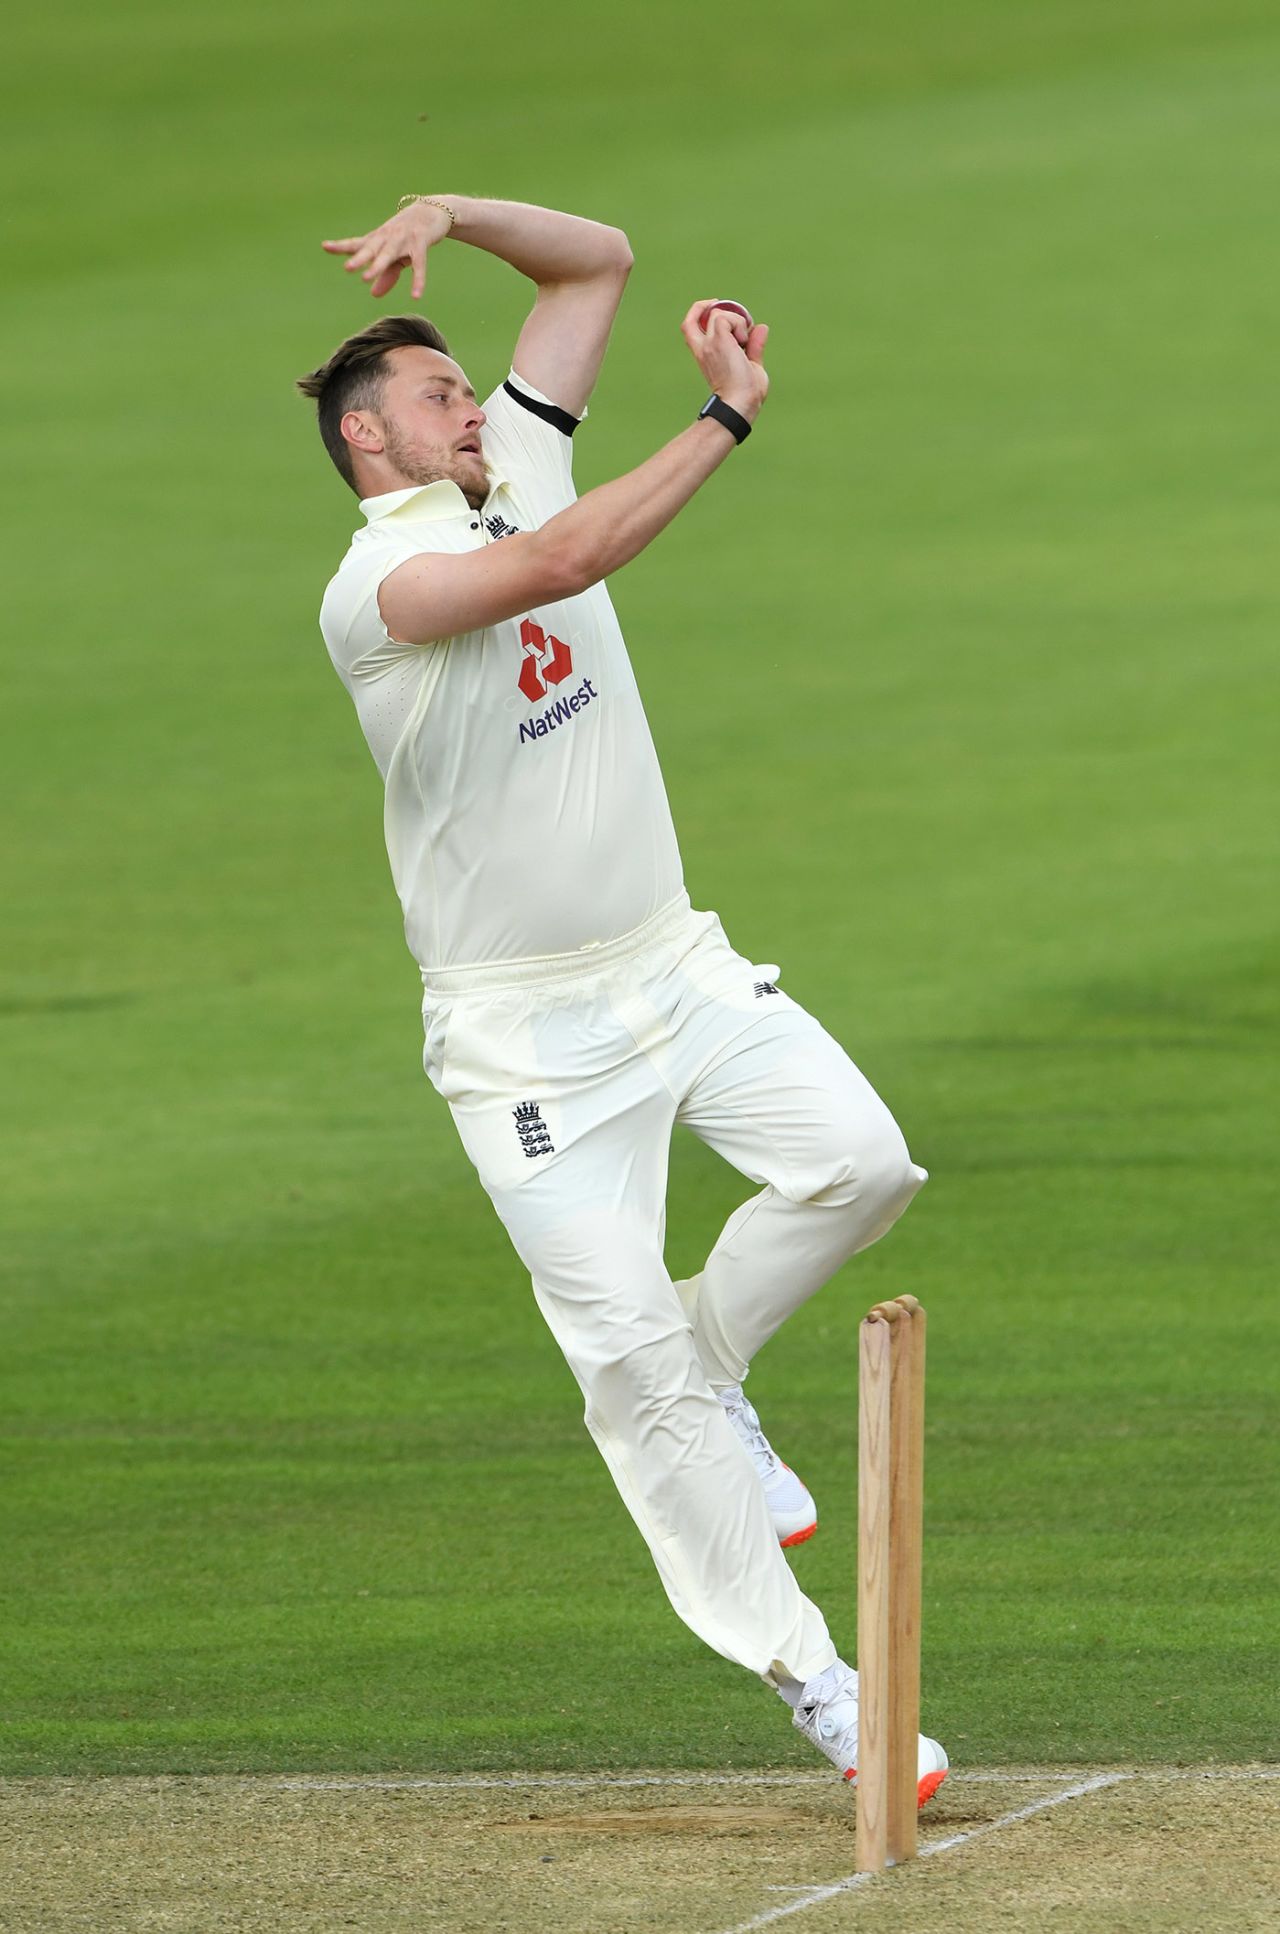 Ollie Robinson struck twice in an over, Stokes v Buttler, day two, Ageas Bowl, July 2, 2020